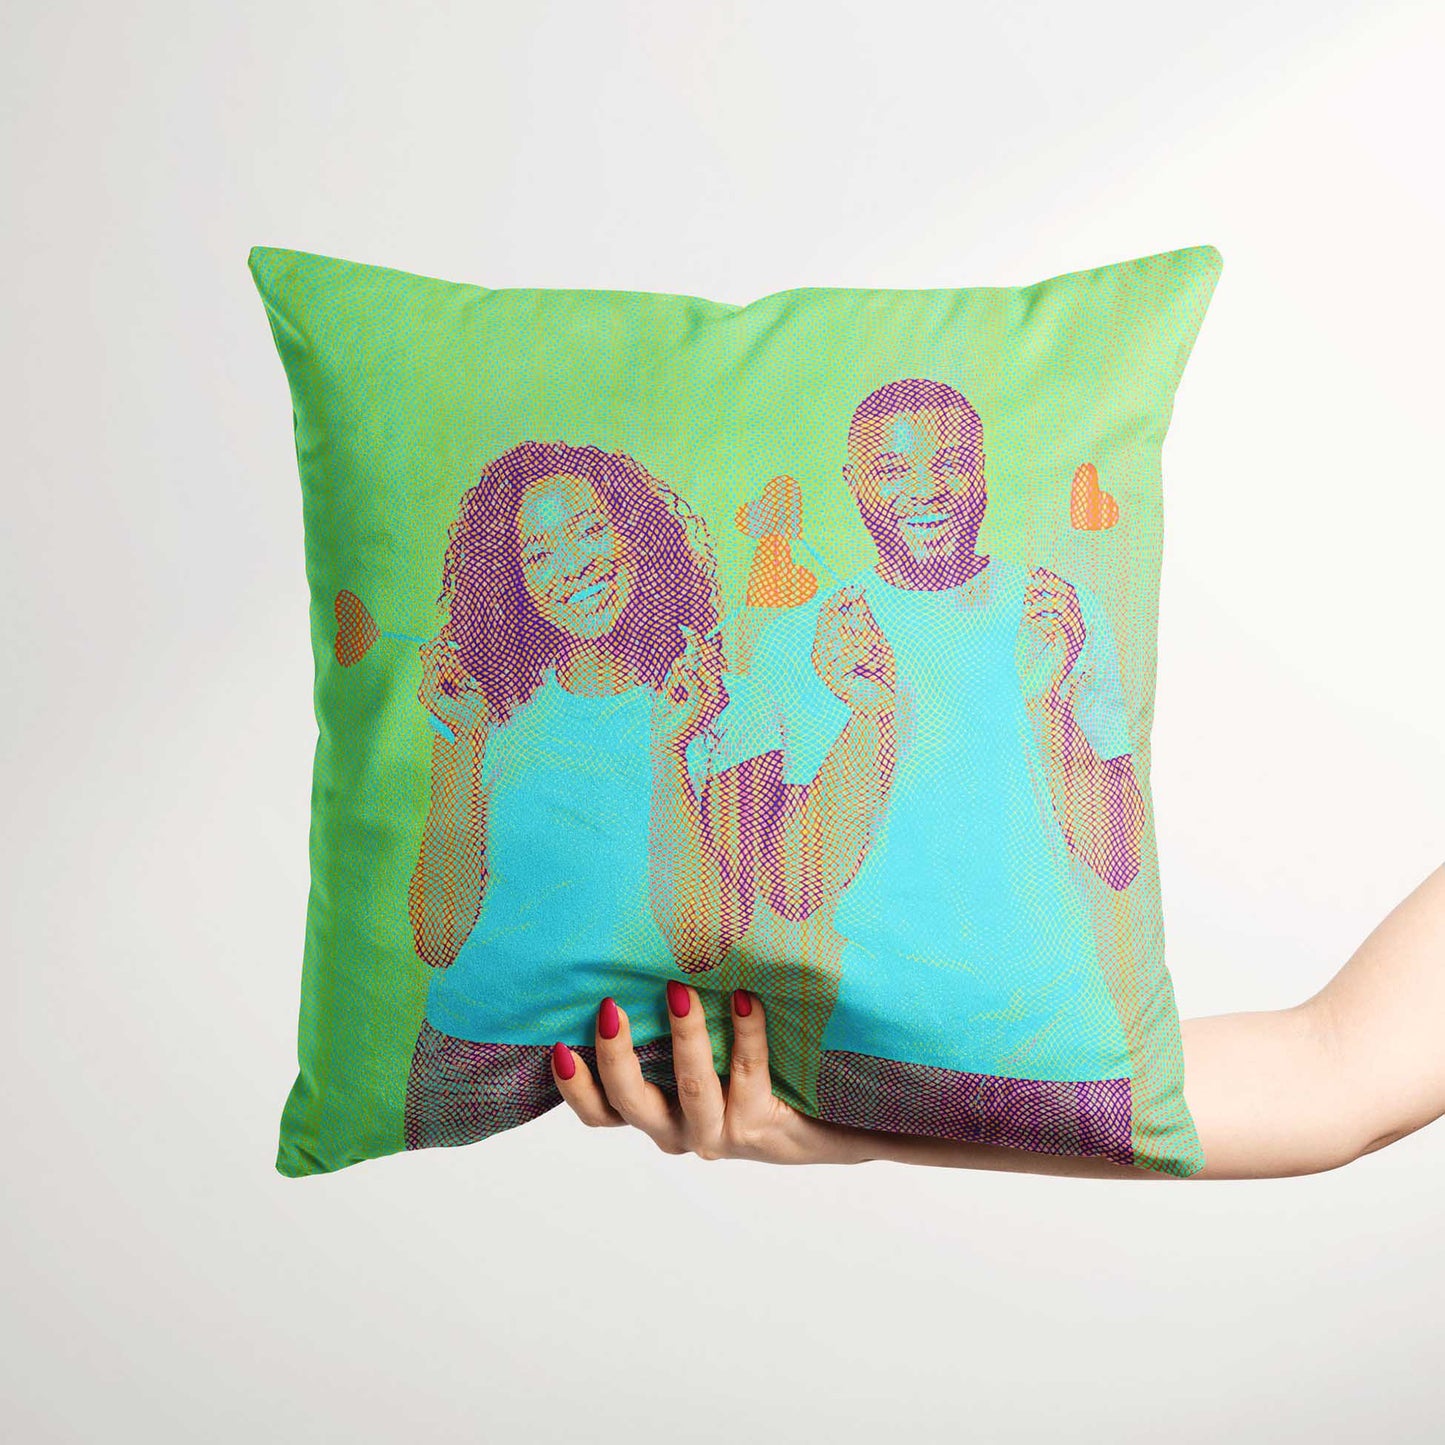 Make your space truly yours with the Personalised Blue Engraved Cushion. Featuring a soft velvet fabric, this cool and fresh cushion can be customised with a print from your photo, adding a fun and personal touch, handmade